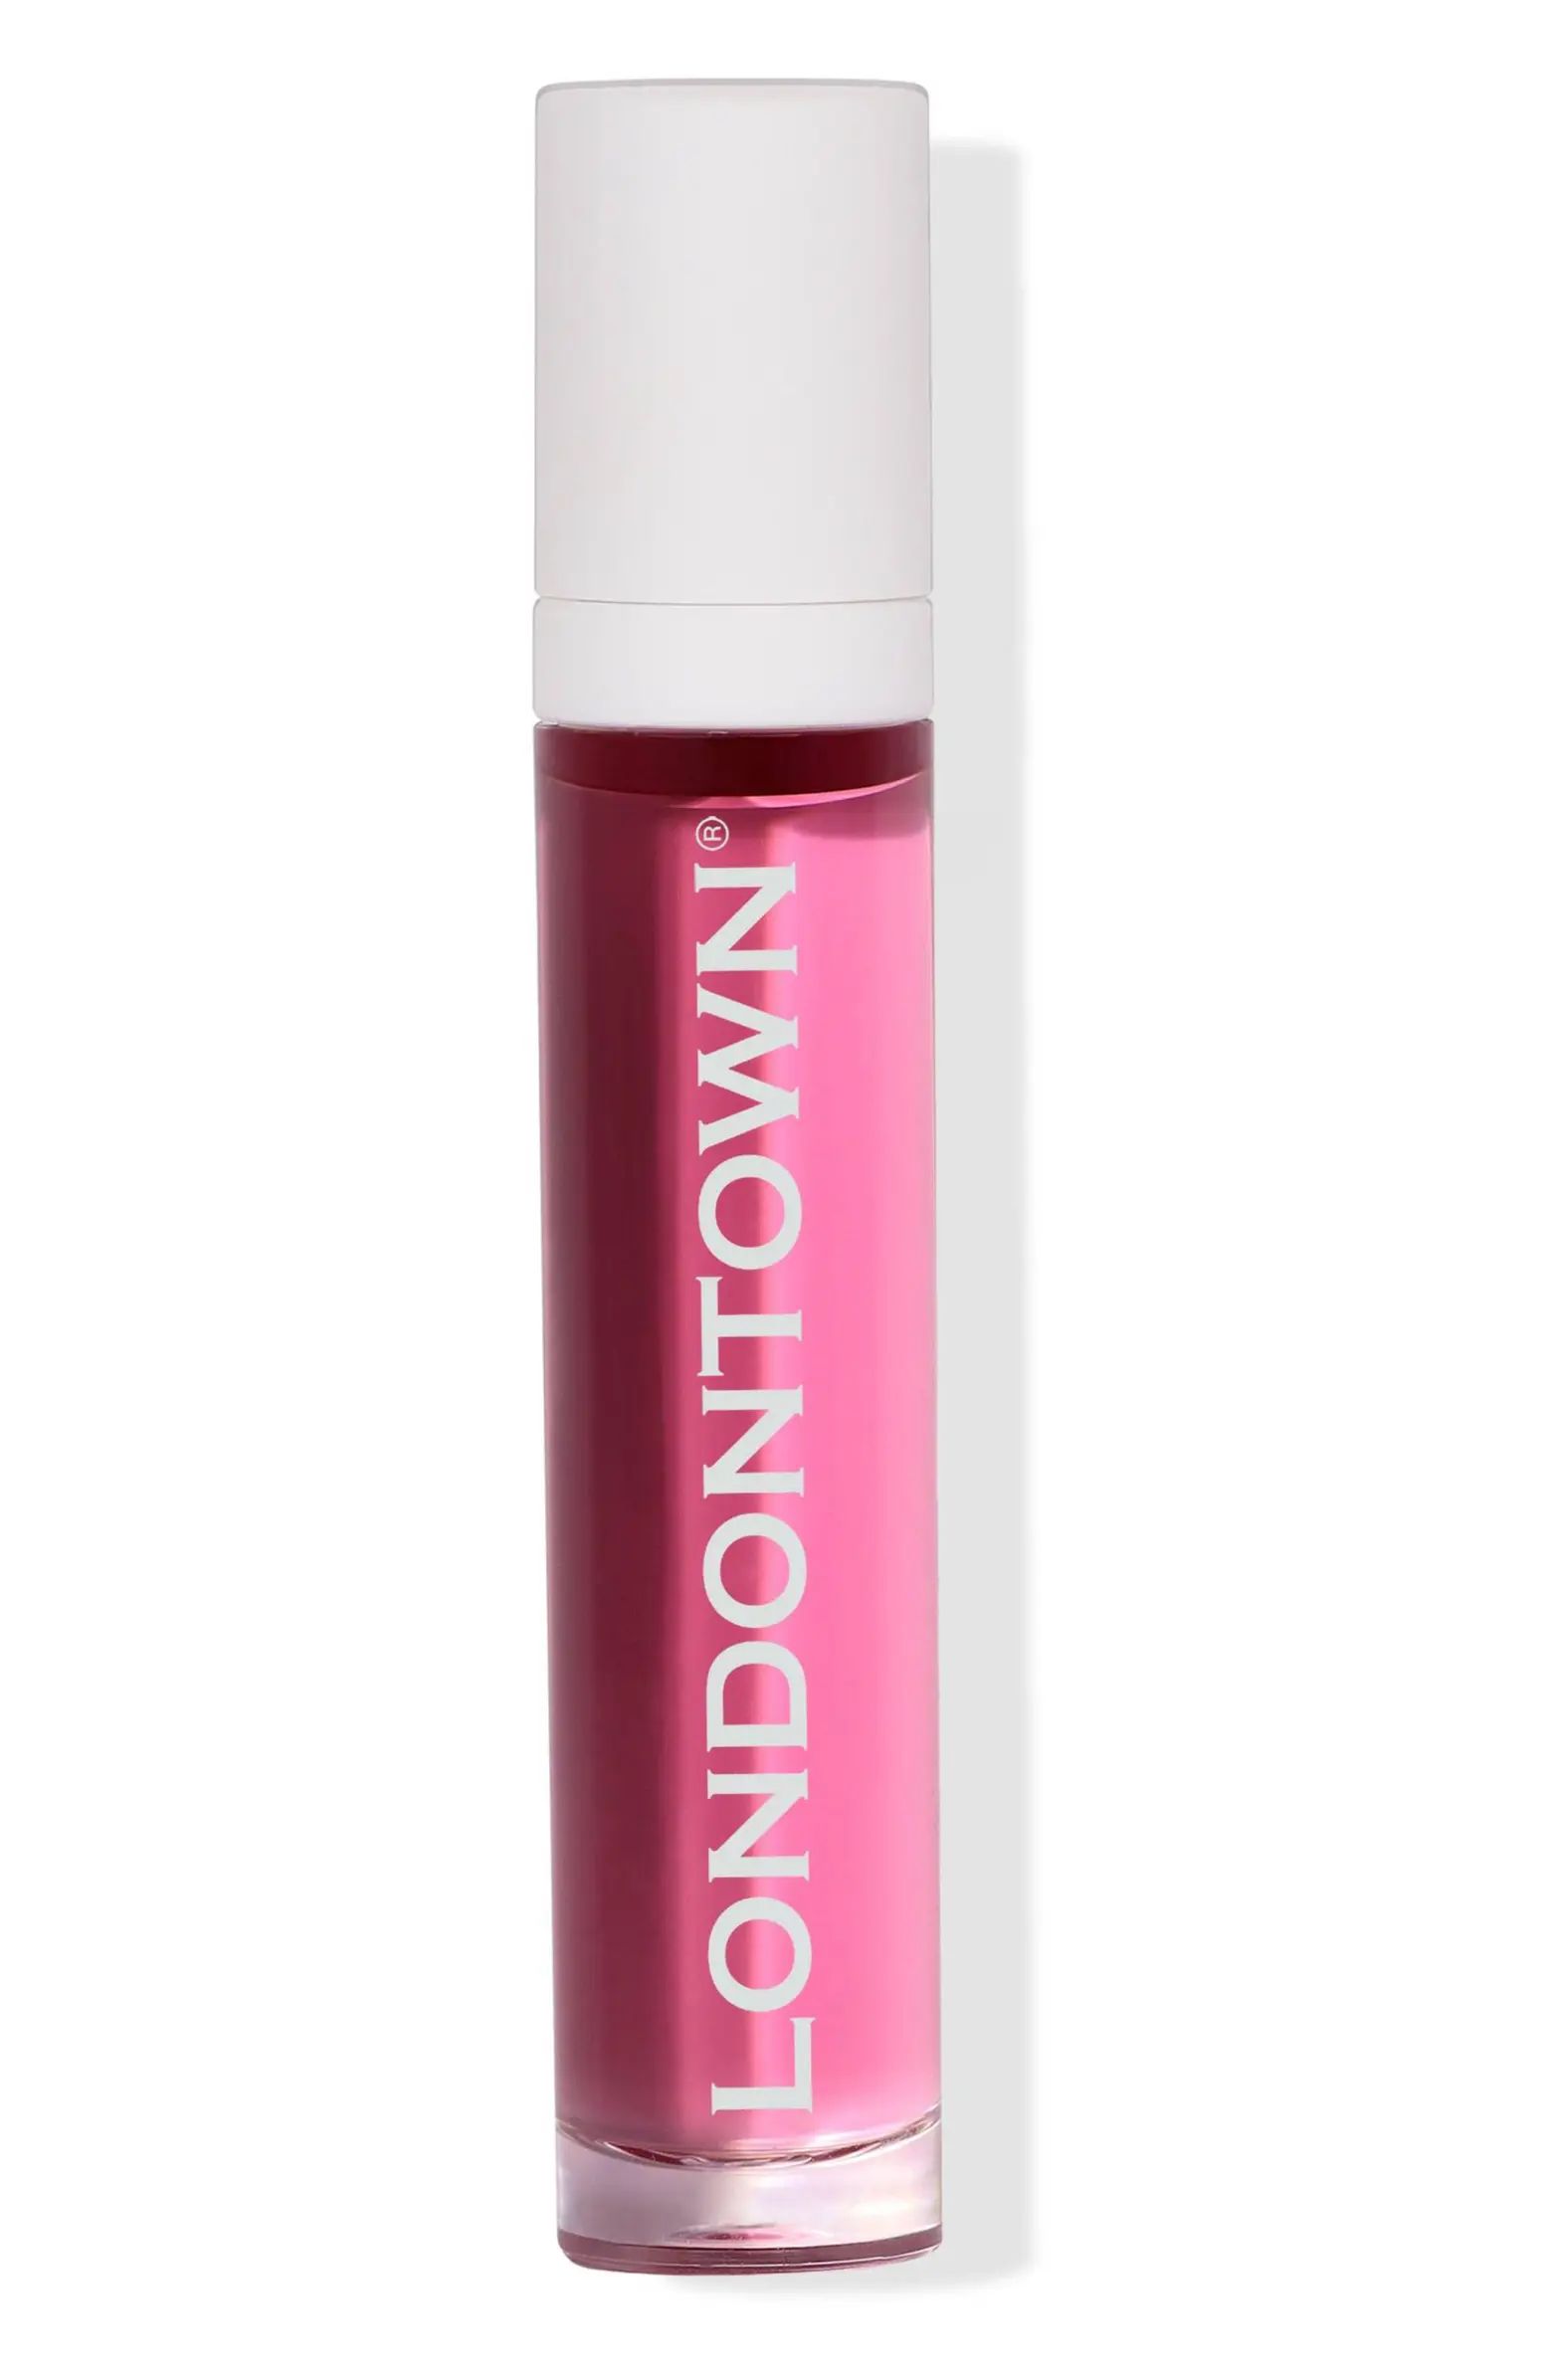 Londontown Dragonfruit Roll & Glow Cuticle Oil | Nordstrom | Nordstrom